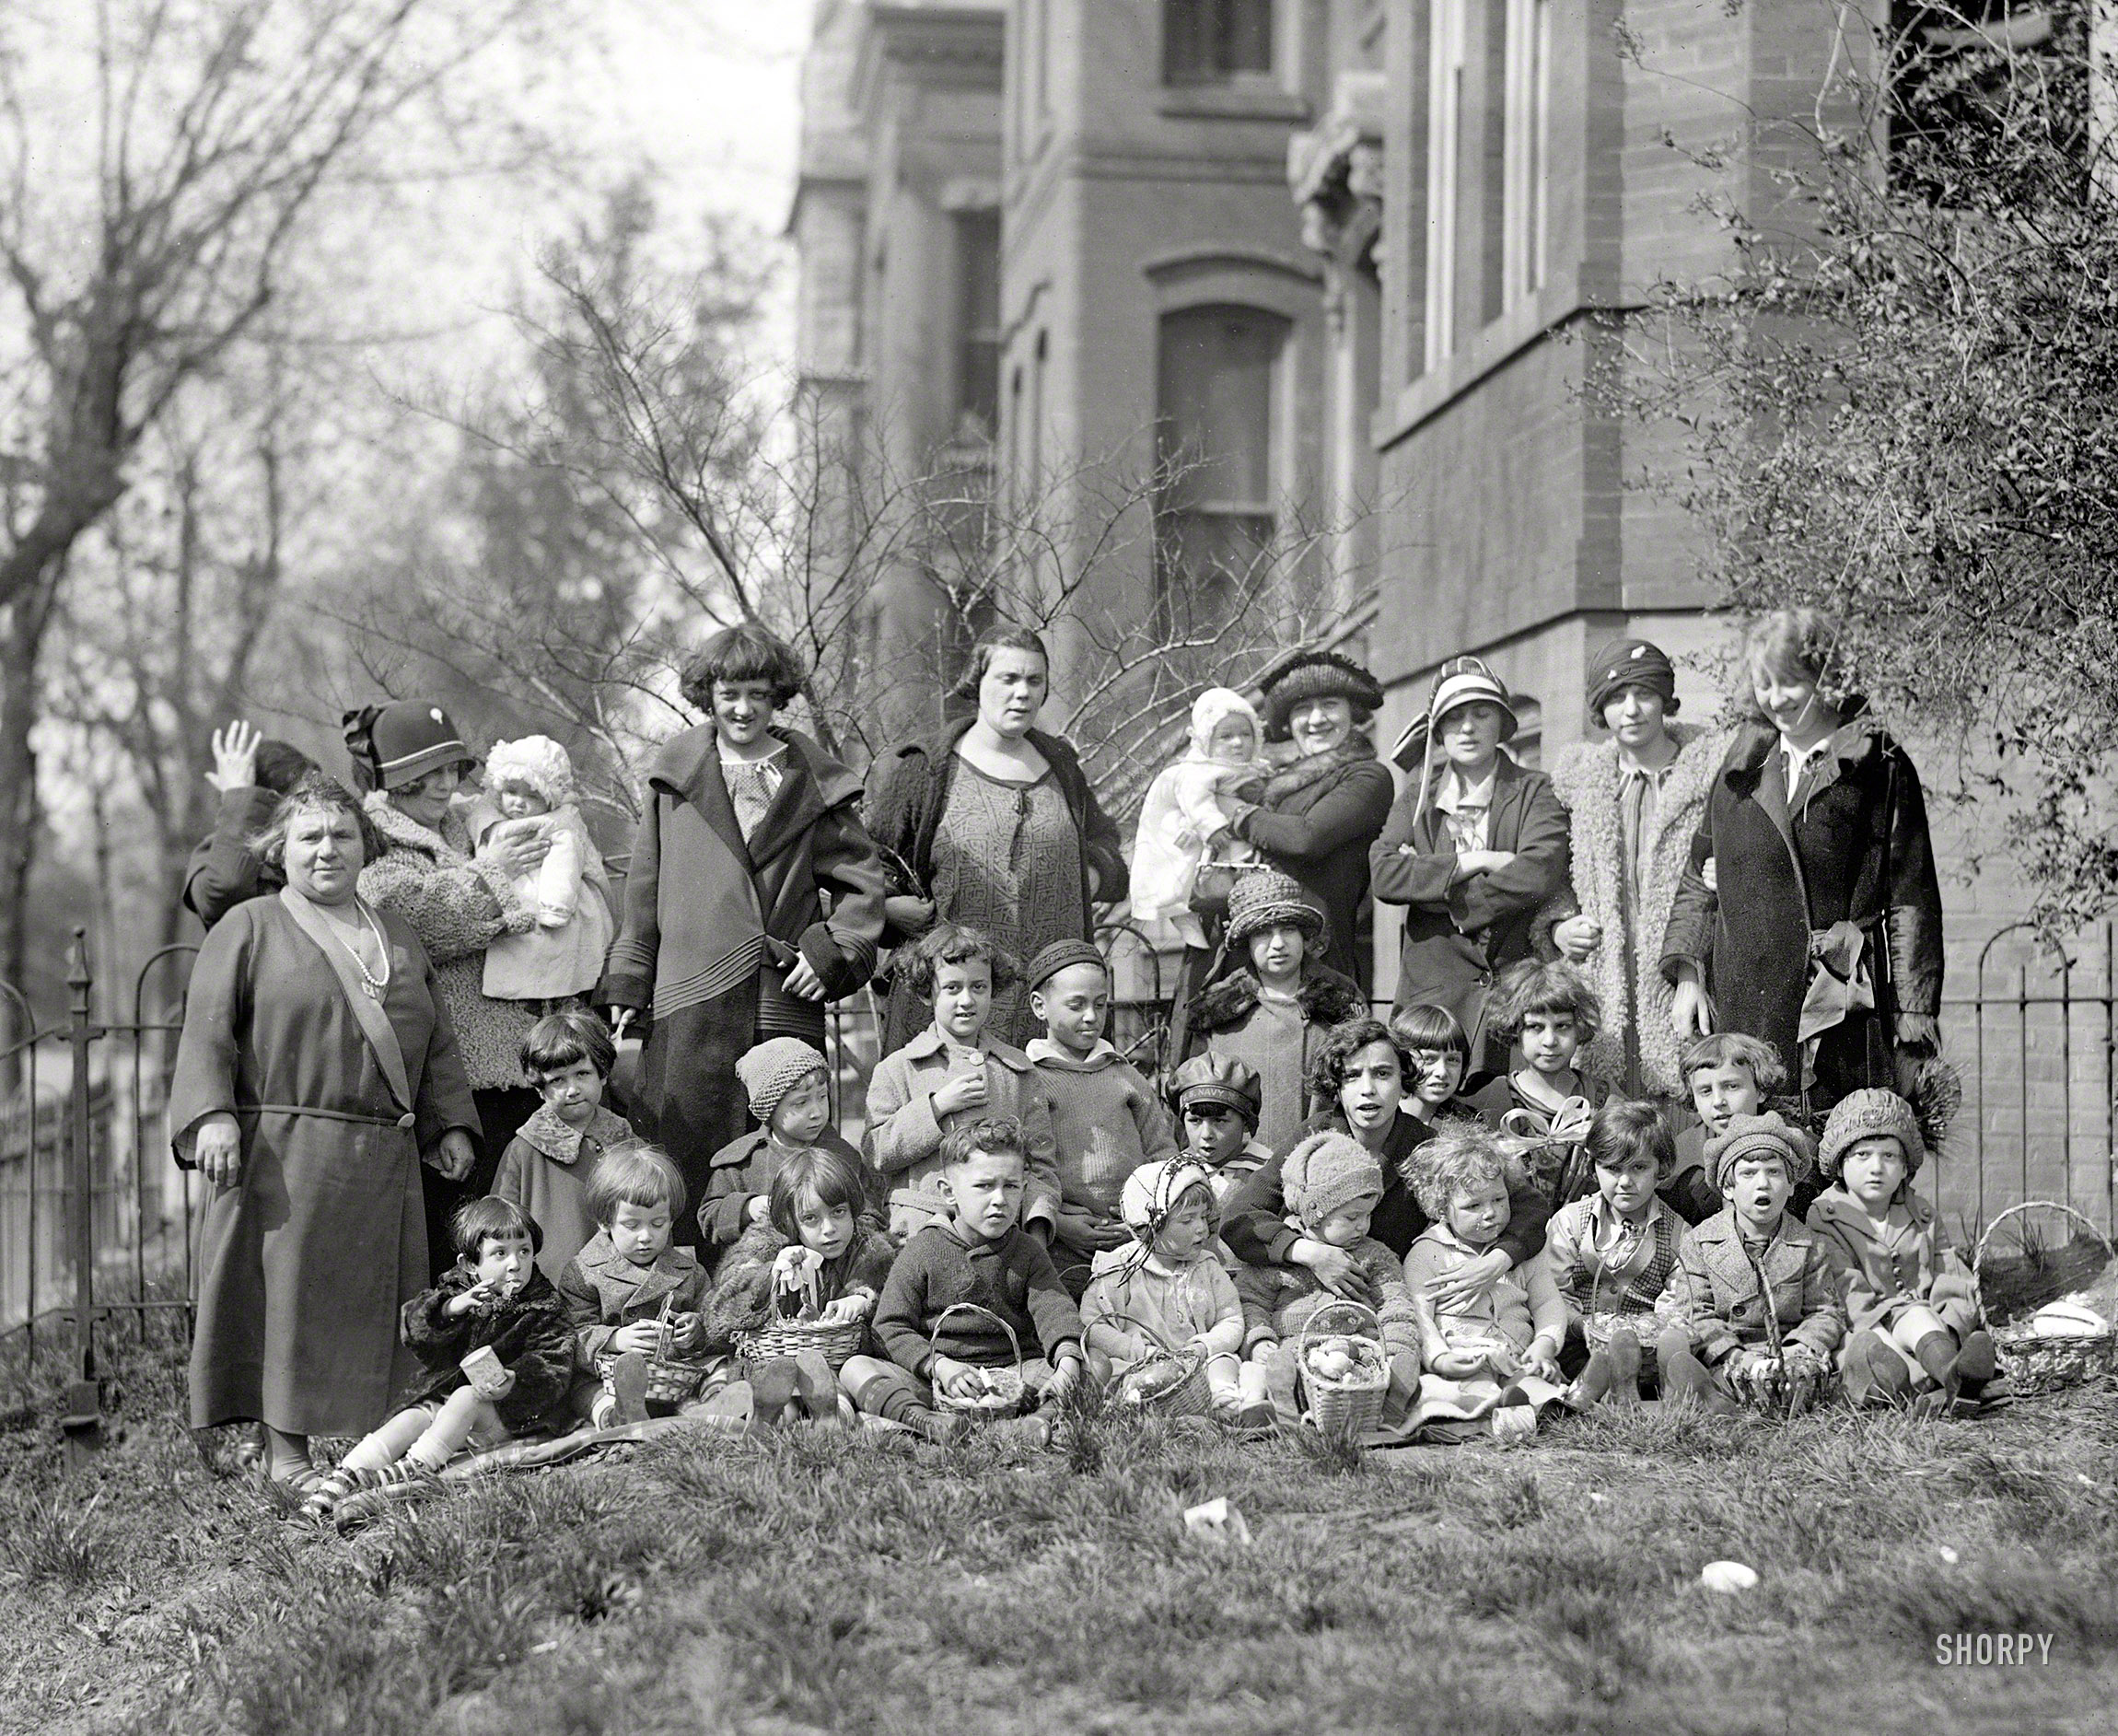 Washington, D.C. "Mrs. Boby's group, 1924." Happy Easter from Shorpy and his peeps! National Photo Company Collection glass negative. View full size.